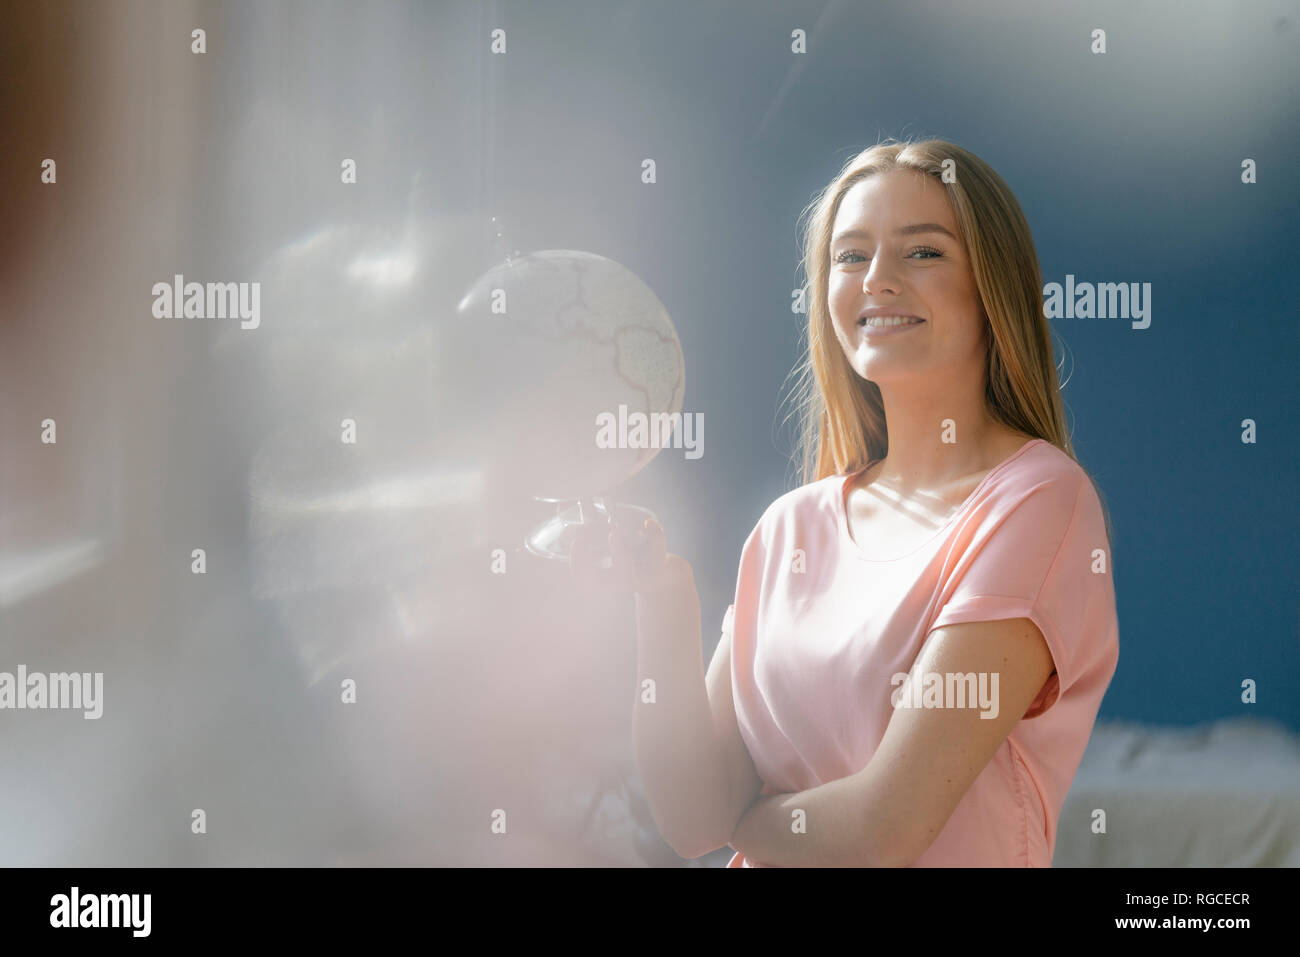 Portrait of smiling young woman with globe Stock Photo